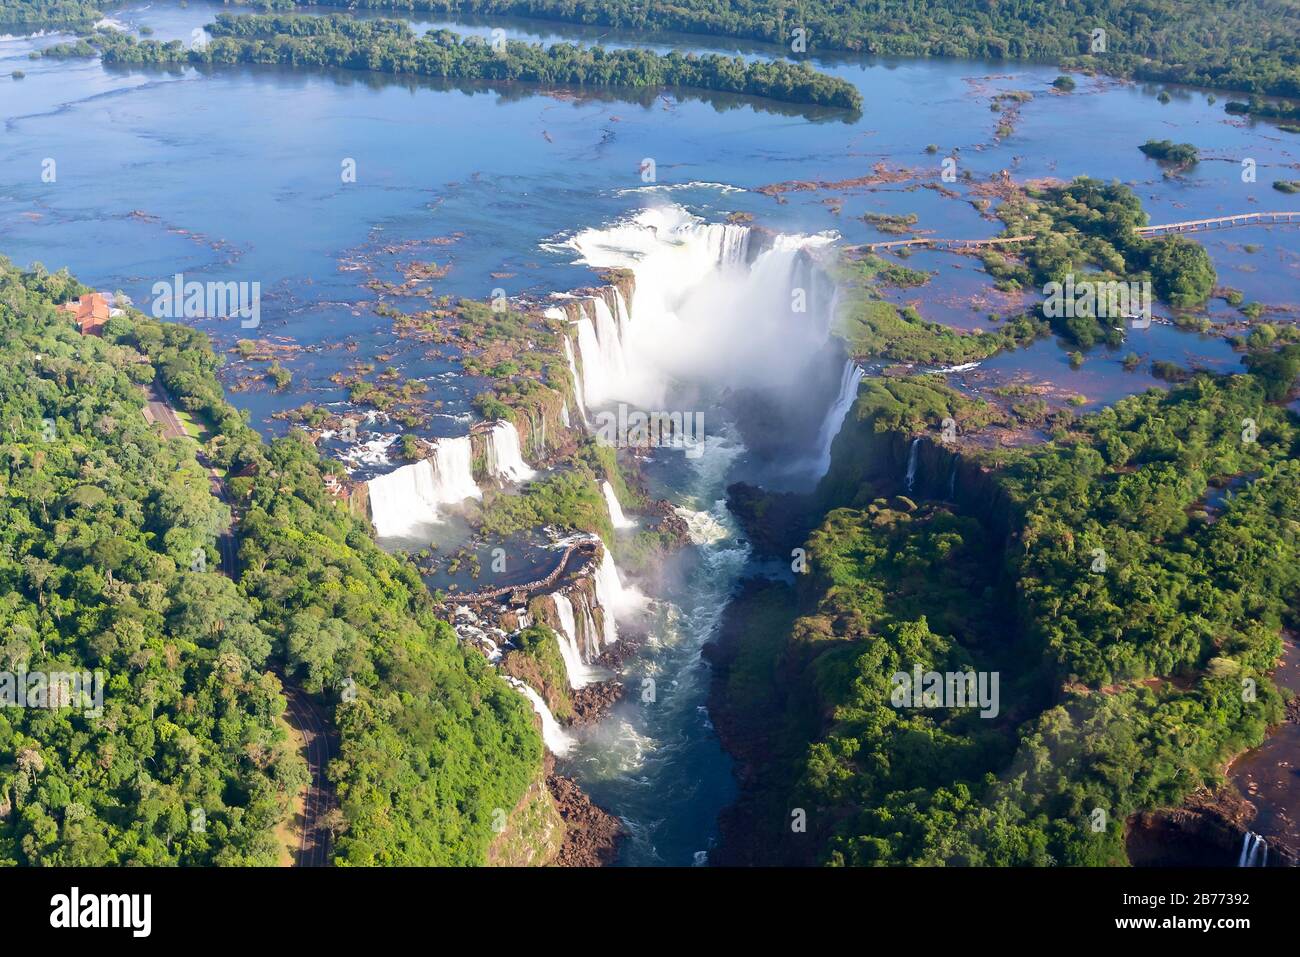 Aerial view of Iguaçu Falls in Brazil and Argentina border. Tourist attraction in South America, listed by UNESCO. Also know as Iguazu Waterfalls. Stock Photo